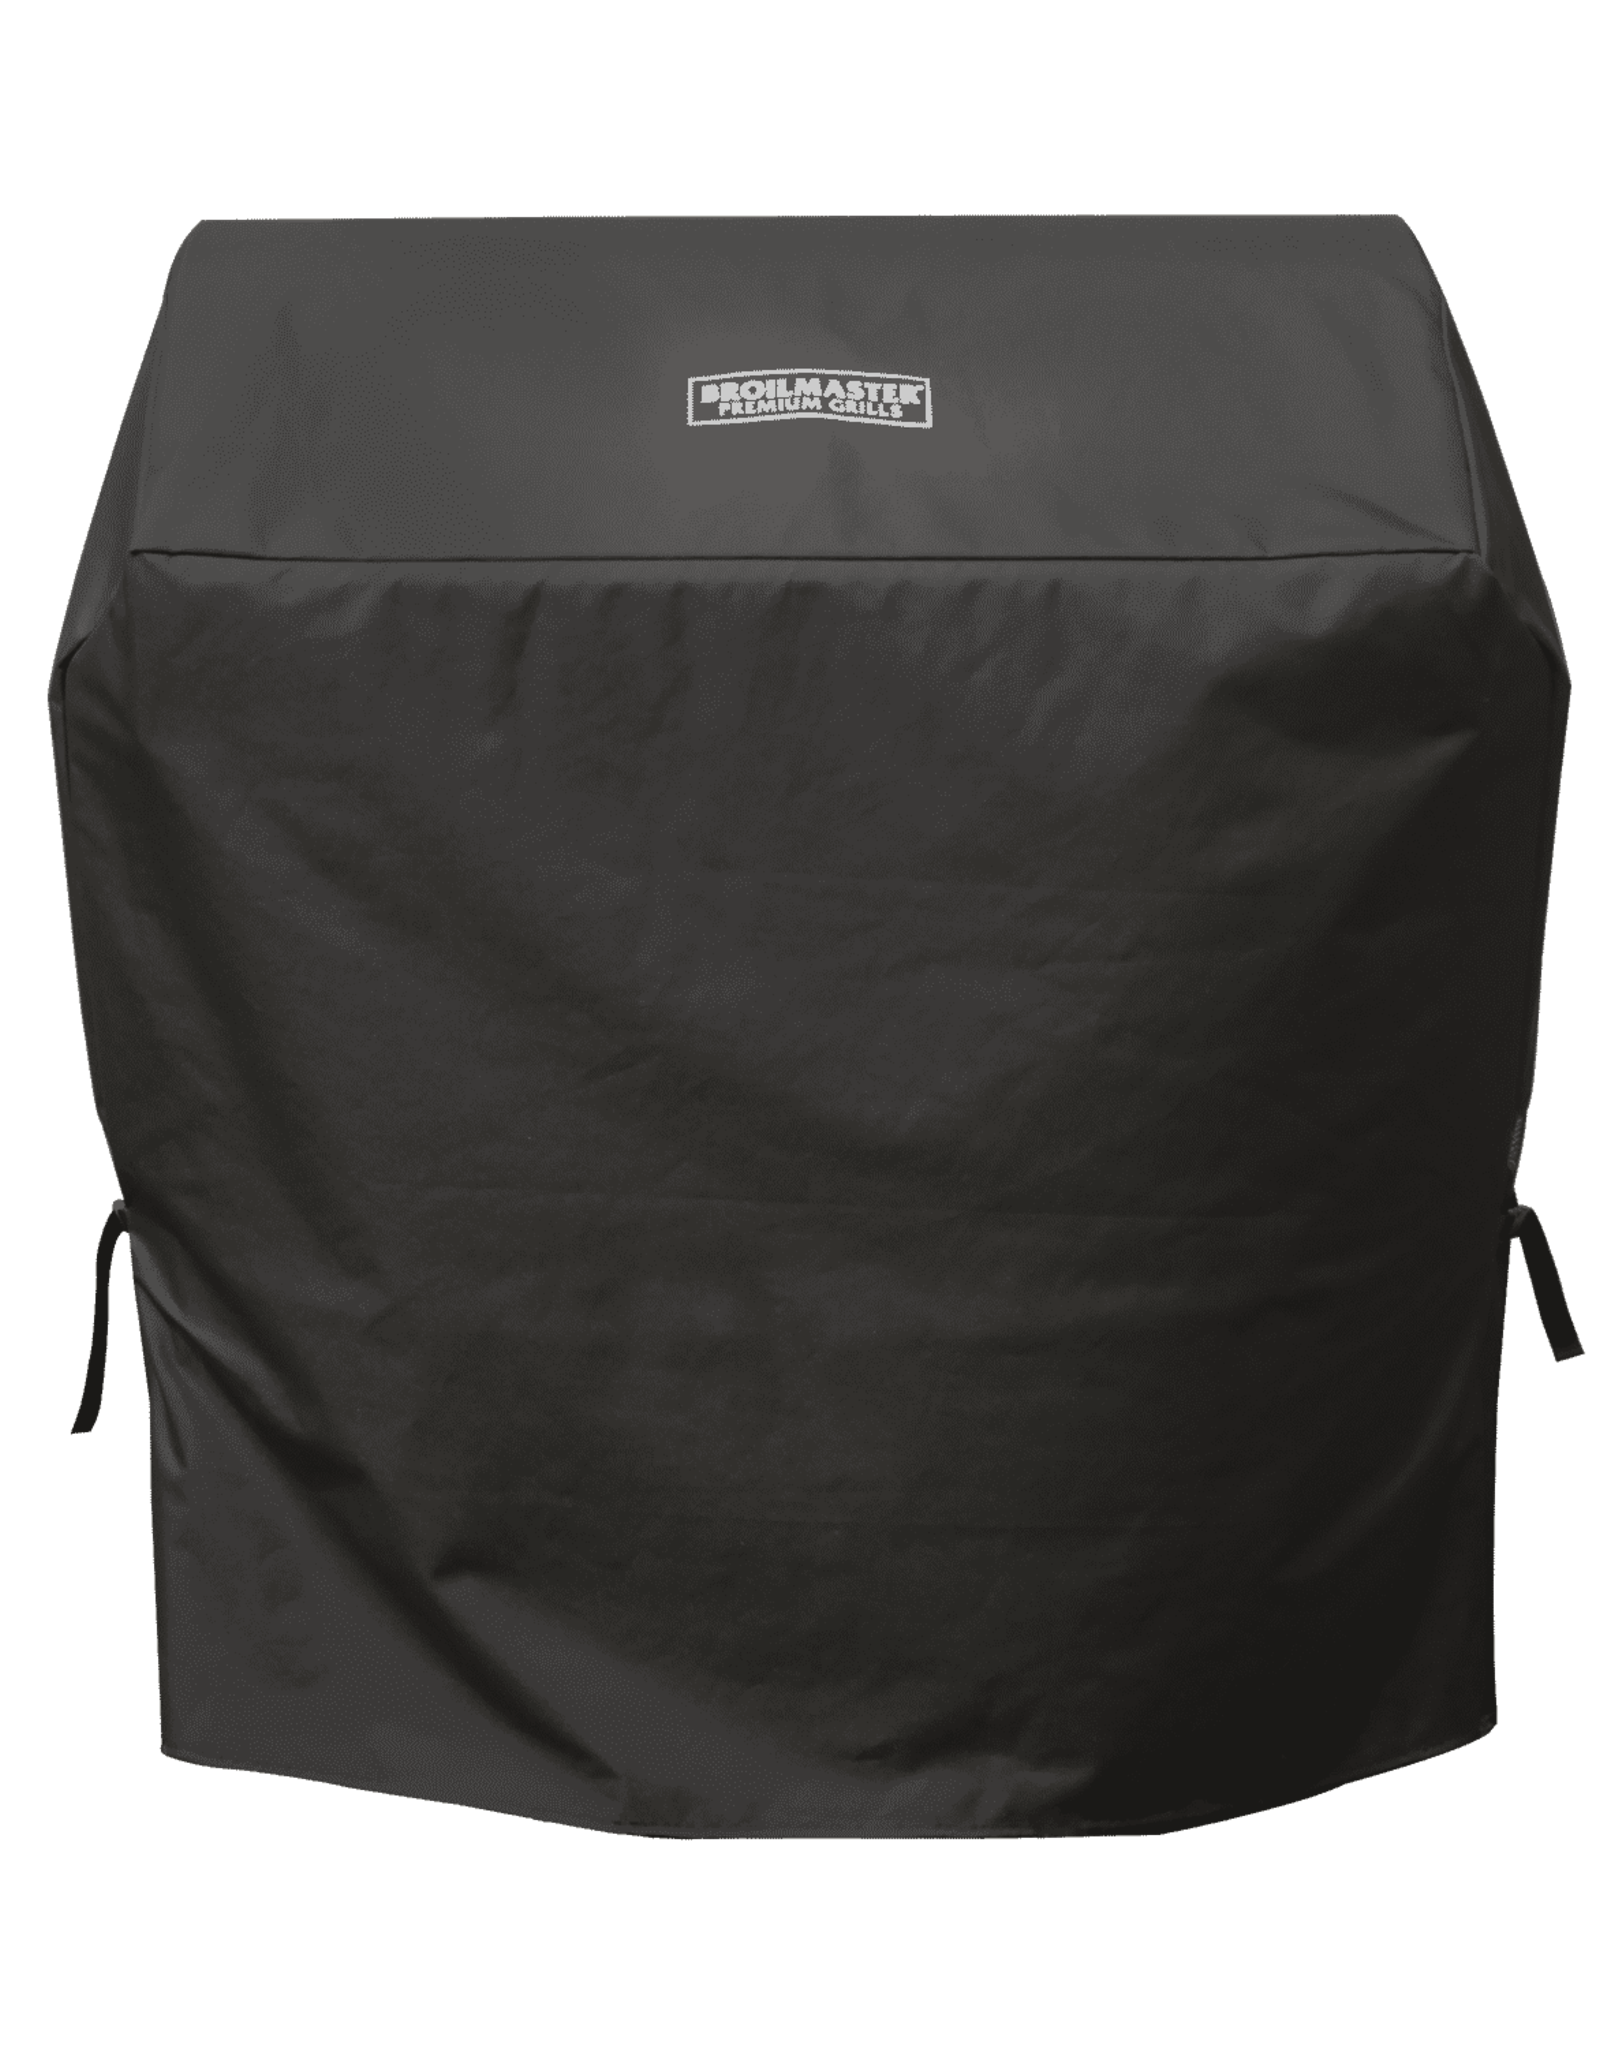 Broilmaster Broilmaster Cover for 34-in. Grill on Cart - BSACV34L